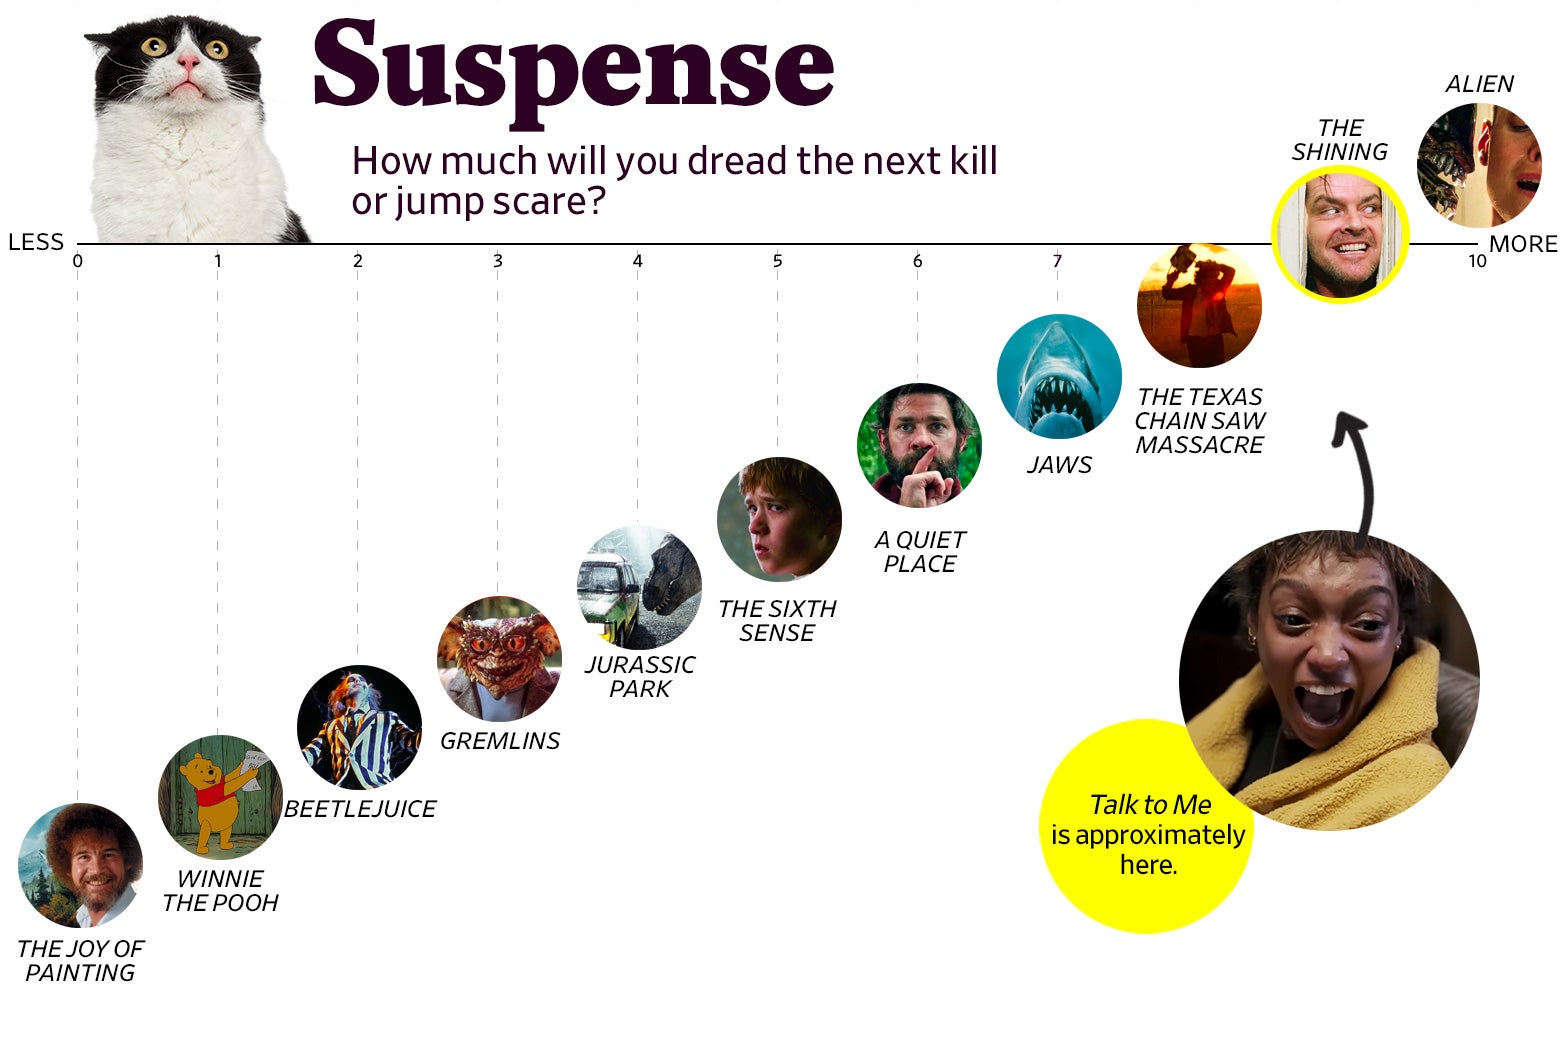 A chart titled “Suspense: How much will you dread the next kill or jump scare?” shows that Talk to Me ranks a 9 in suspense, roughly the same as The Shining. The scale ranges from The Joy of Painting (0) to Alien (10).